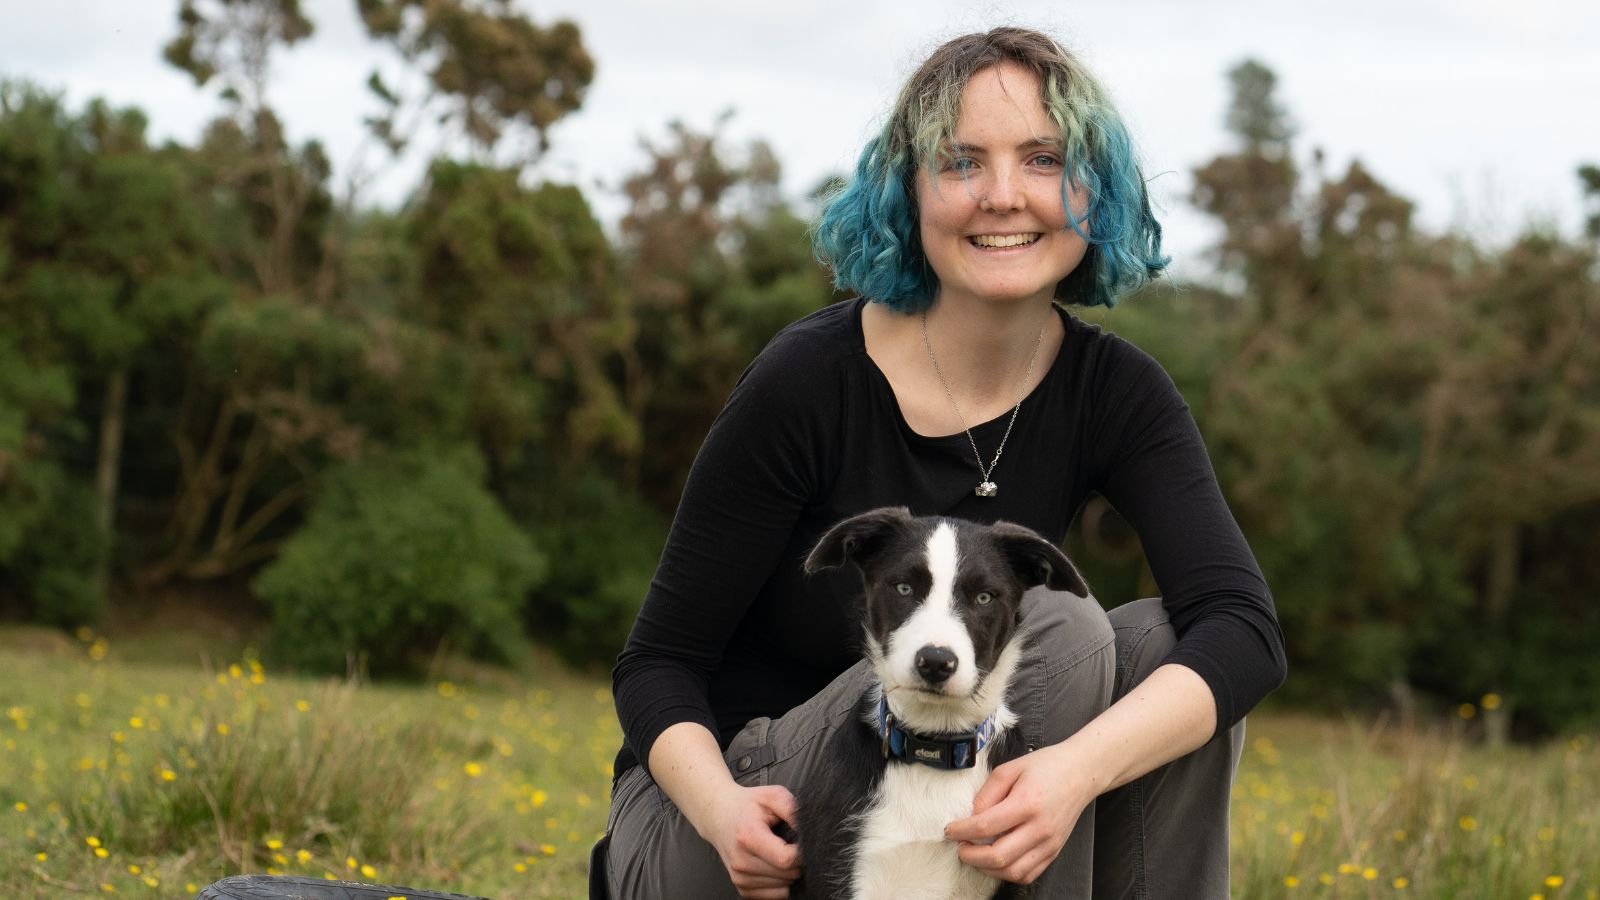 Photo of Edith Matthewson, who has shoulder length blue hair and her dog in a field